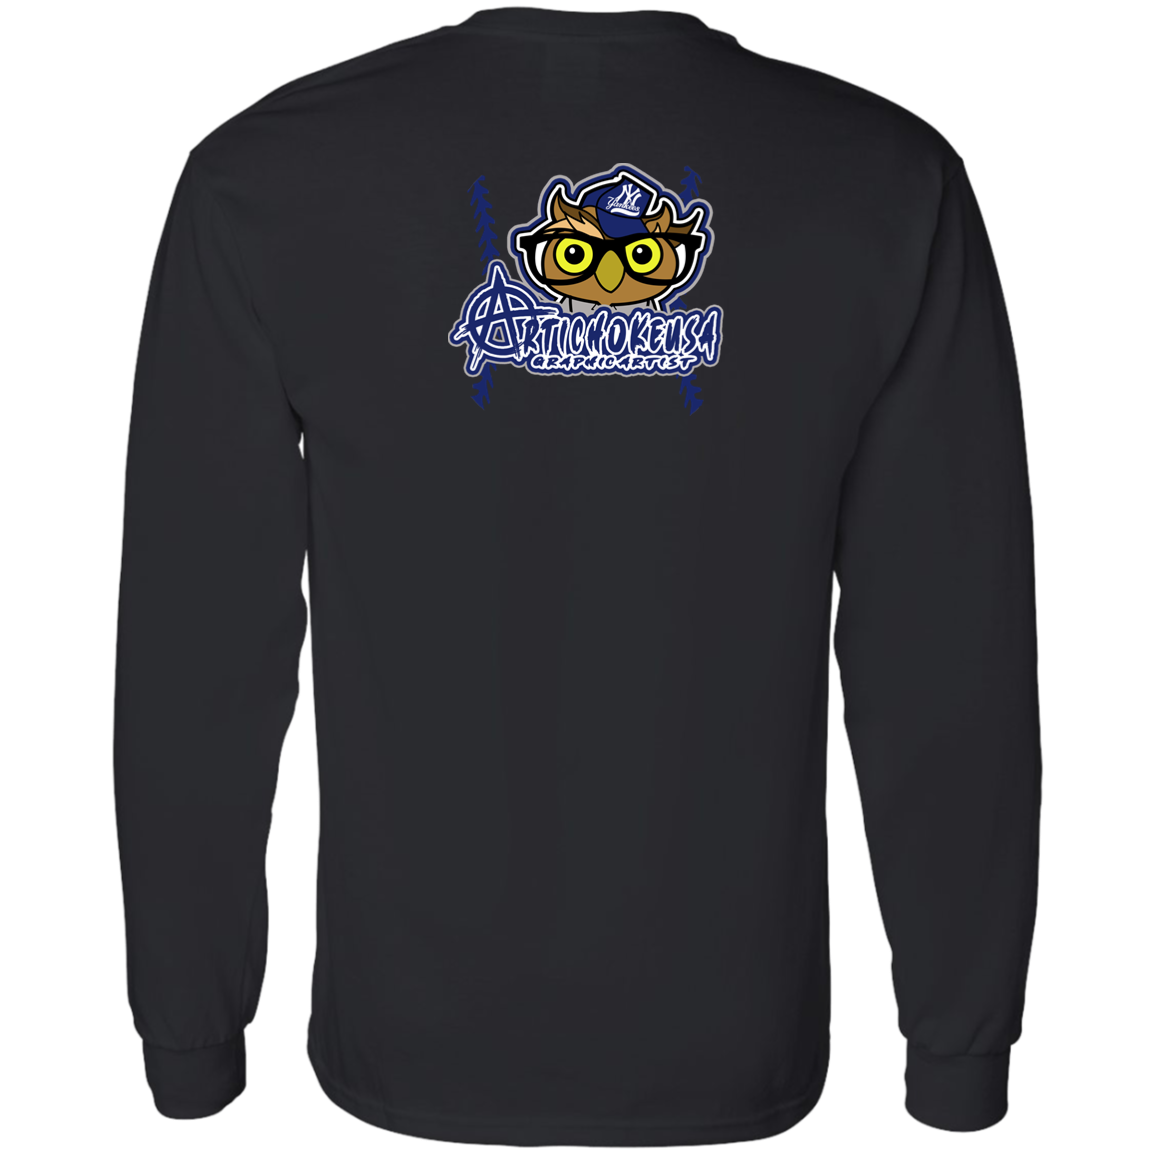 ArtichokeUSA Character and Font design. New York Owl. NY Yankees Fan Art. Let's Create Your Own Team Design Today. 100 % Cotton LS T-Shirt